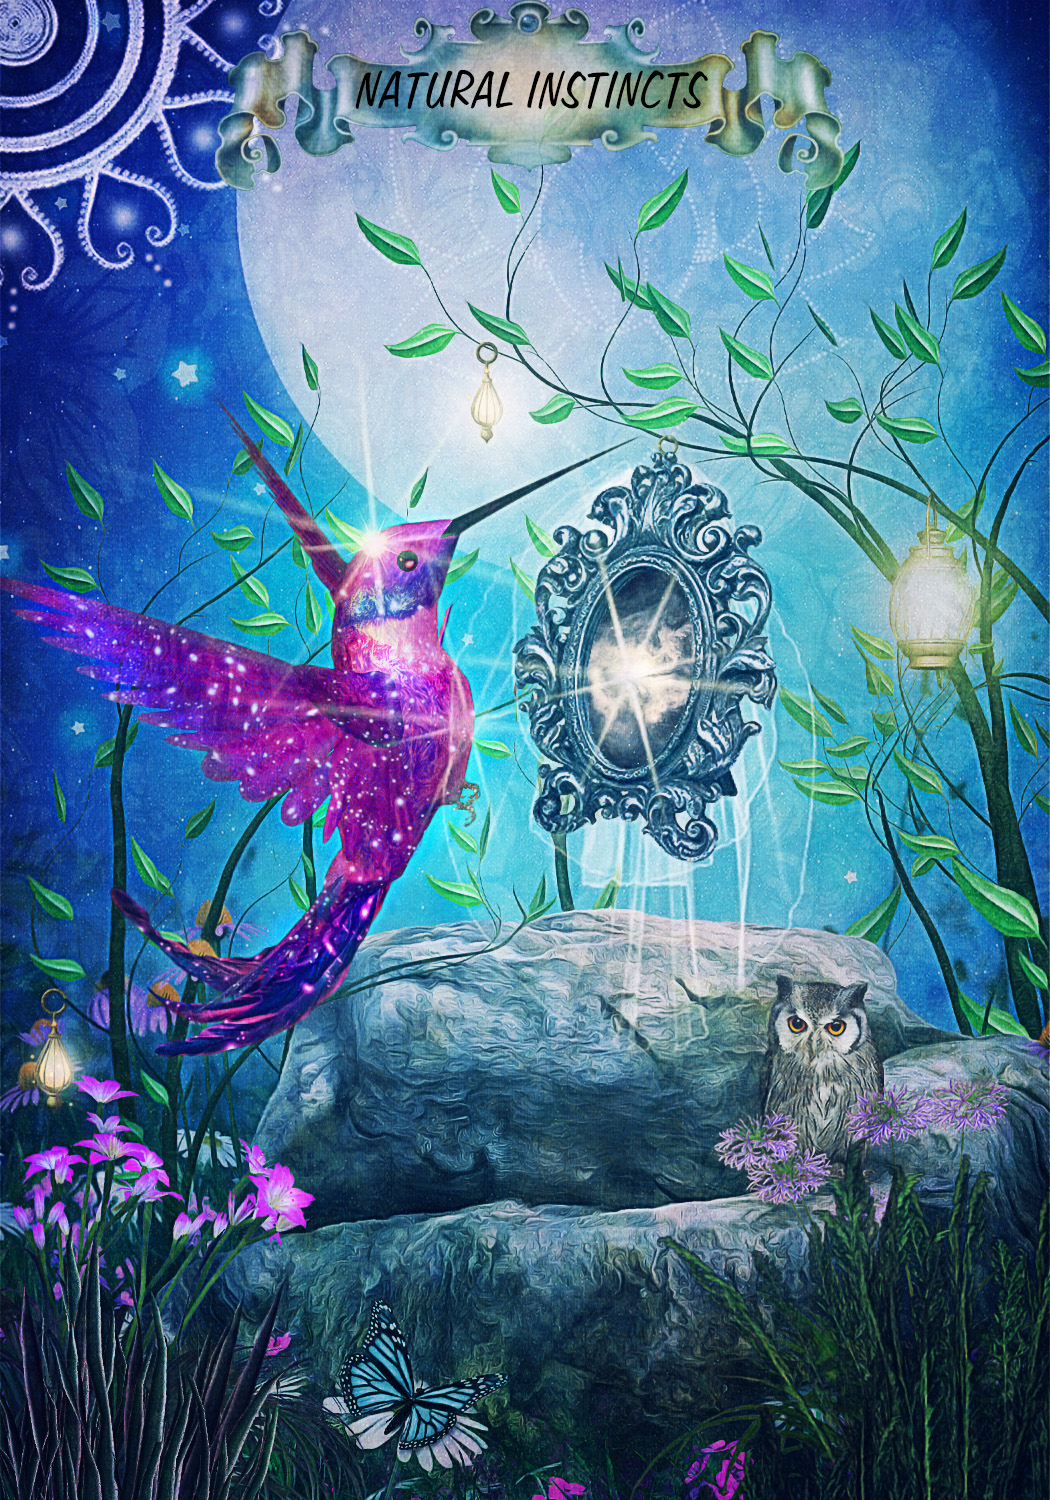 A sparkly pink and purple hummingbird and a mirror